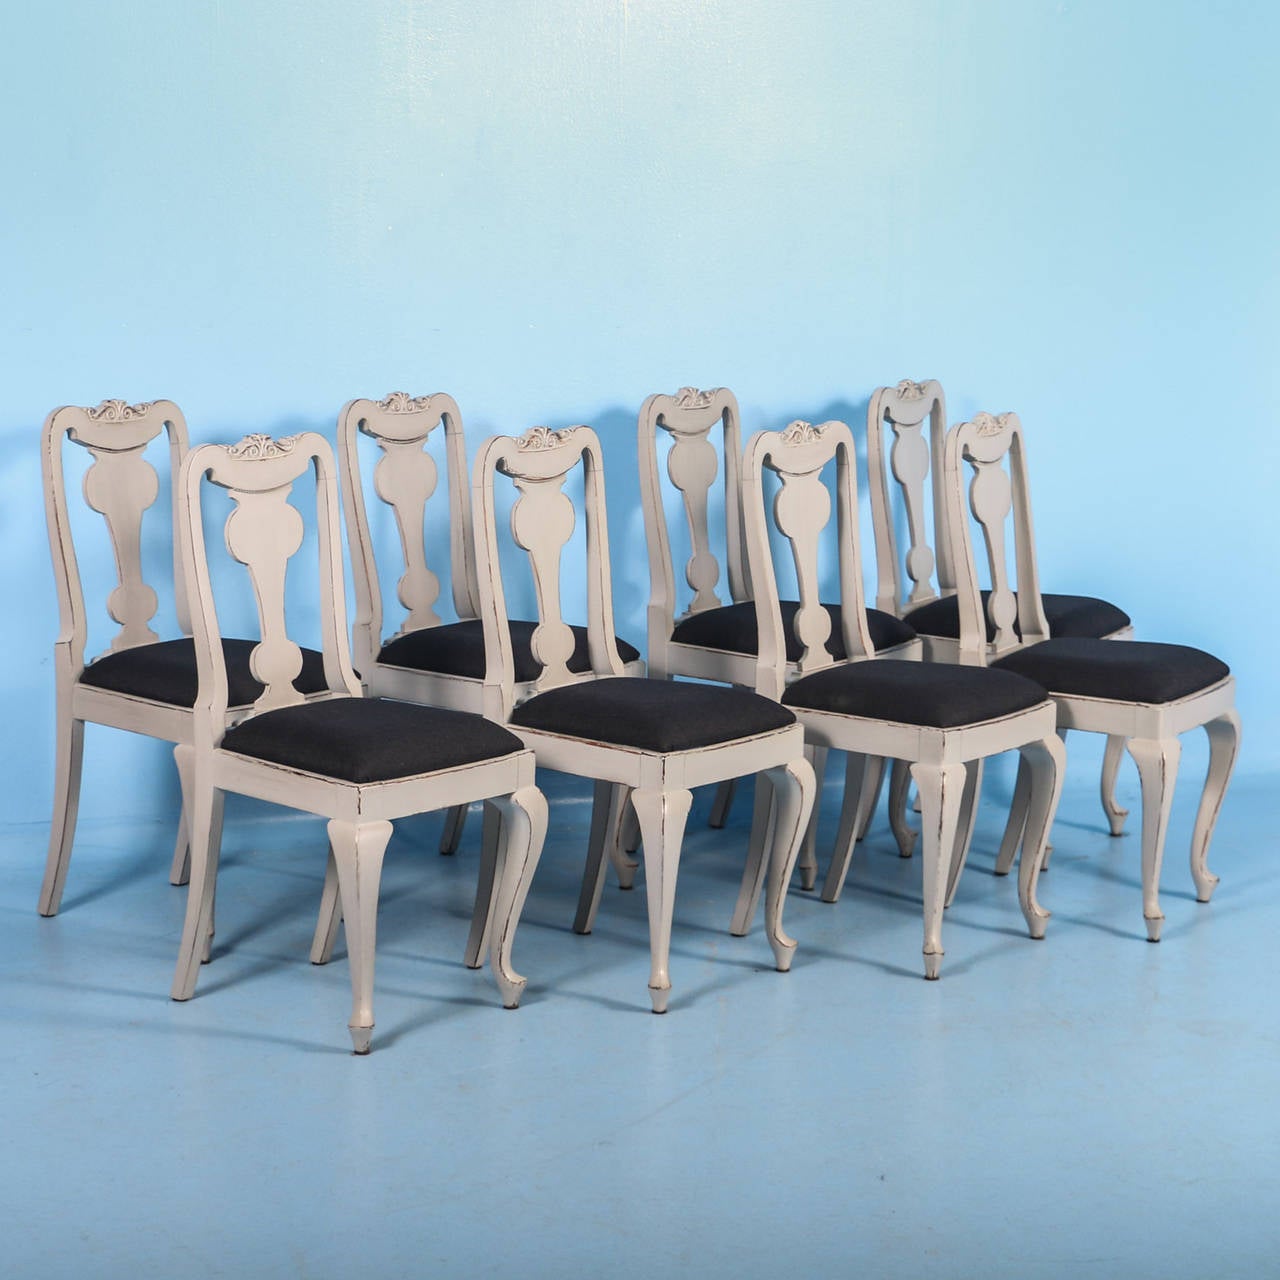 Antique Swedish dining chair set of ten chairs. This large set of dining chairs includes eight side chairs and two arm chairs. They have recently been given a gray painted finish, which compliments the Swedish style and era. Please examine the close